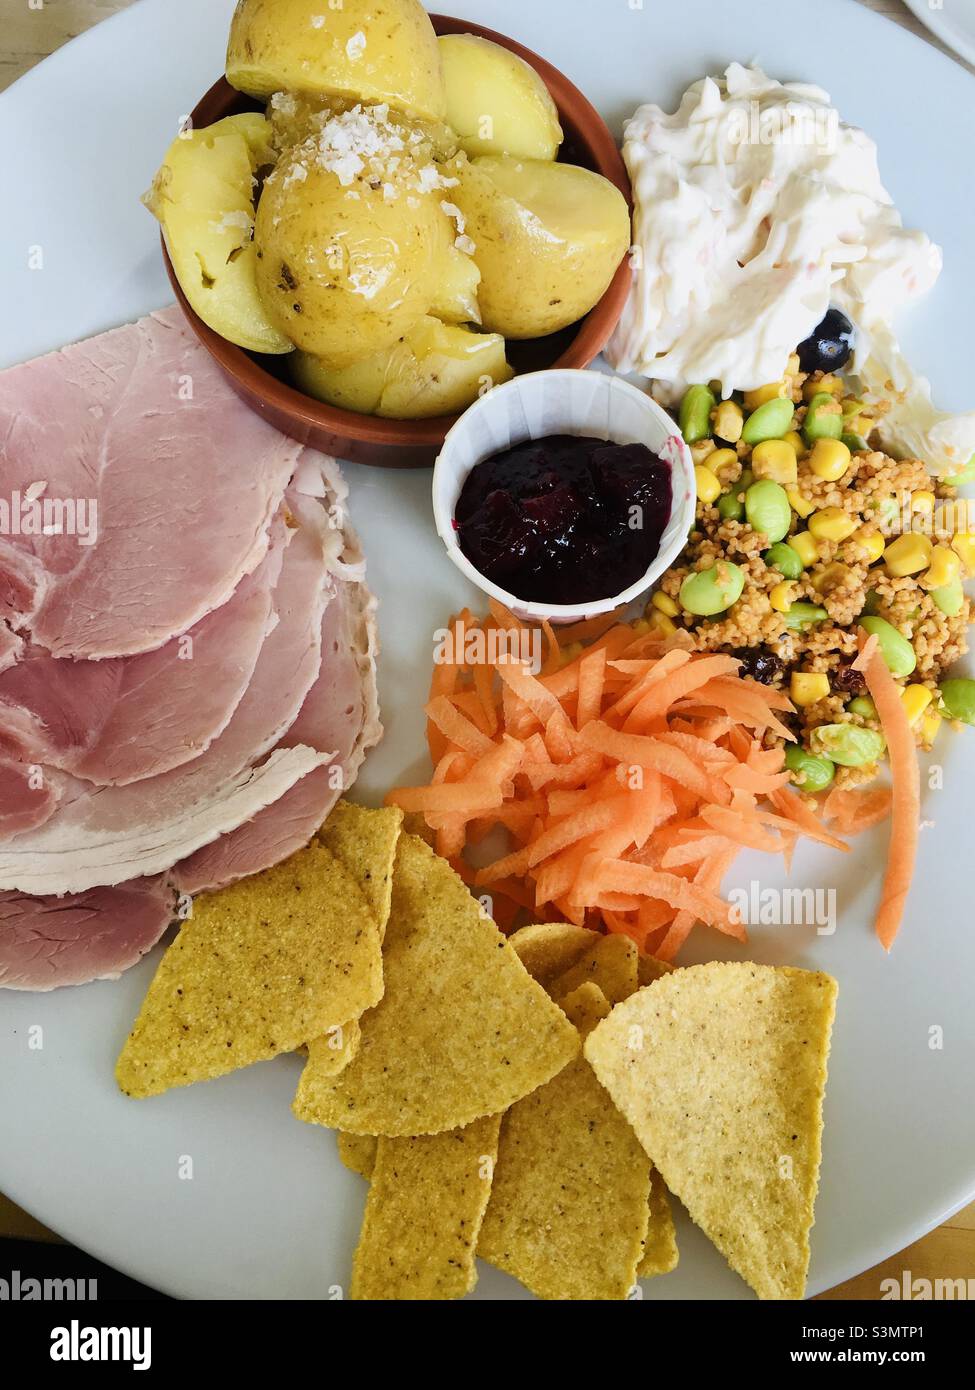 Delicious ham couc cous new potatoes coleslaw and nachos for lunch on the UK Stock Photo